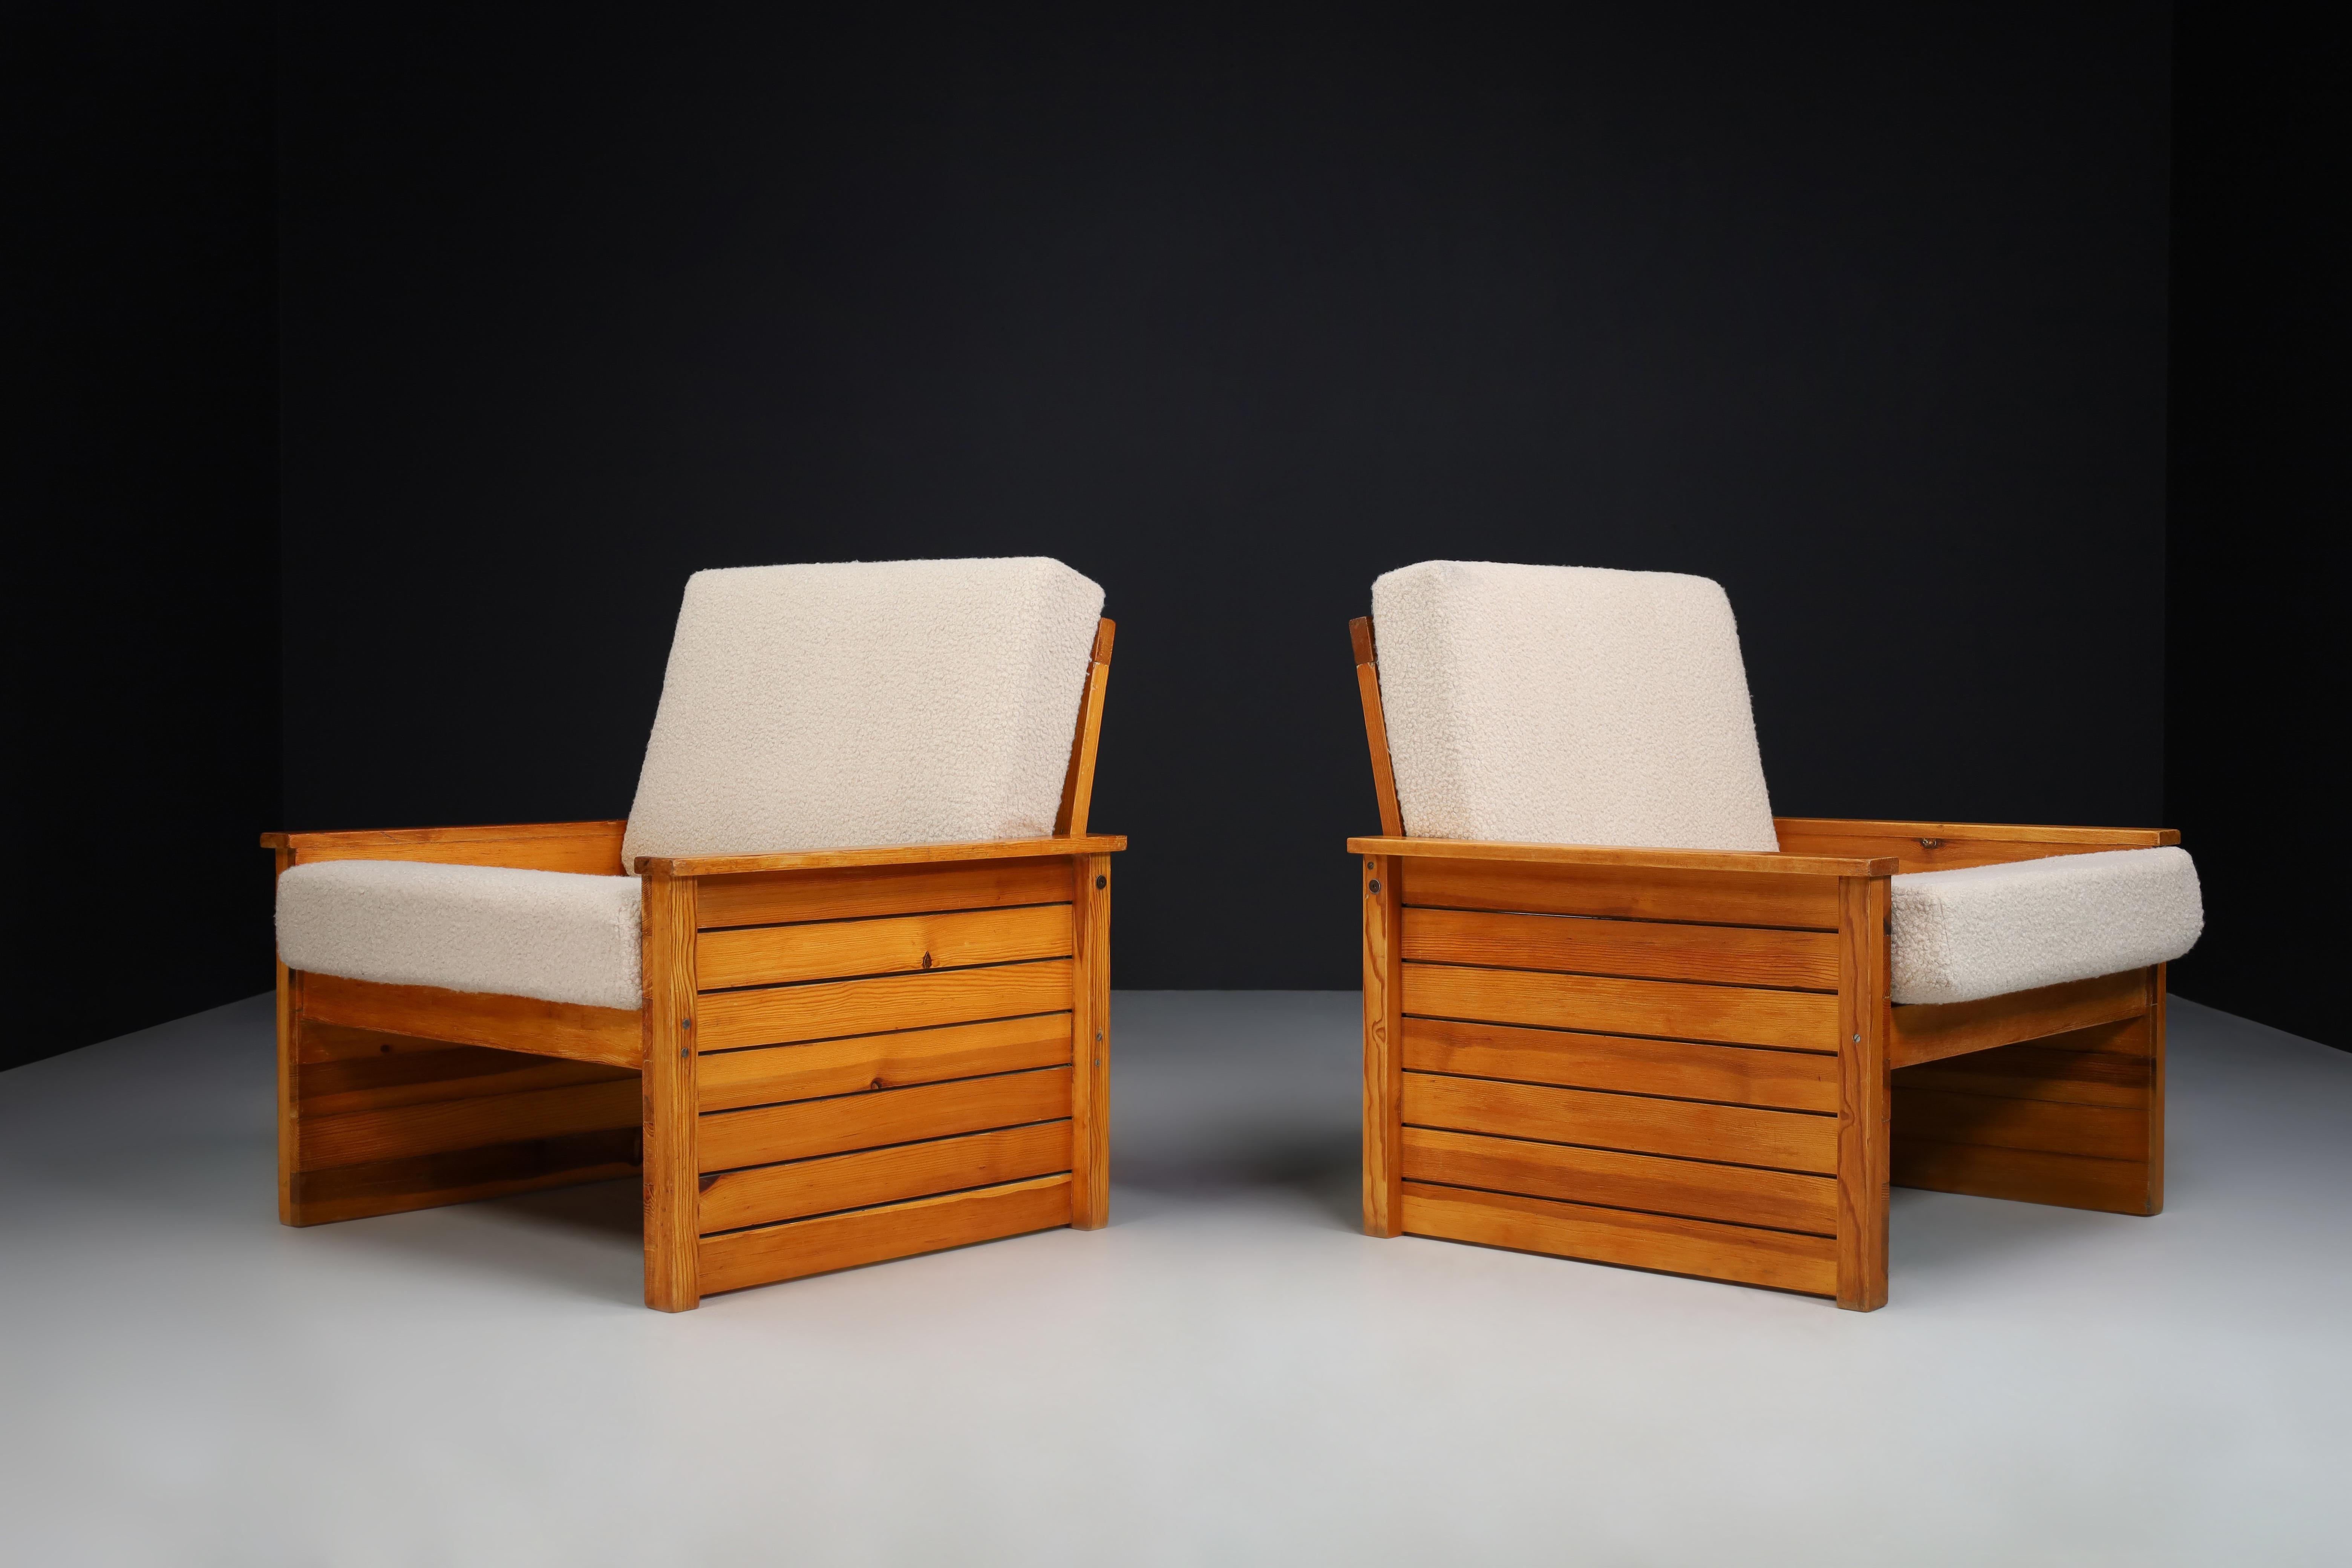 European Pine and Teddy Fabric Lounge Chairs, France, 1960s For Sale